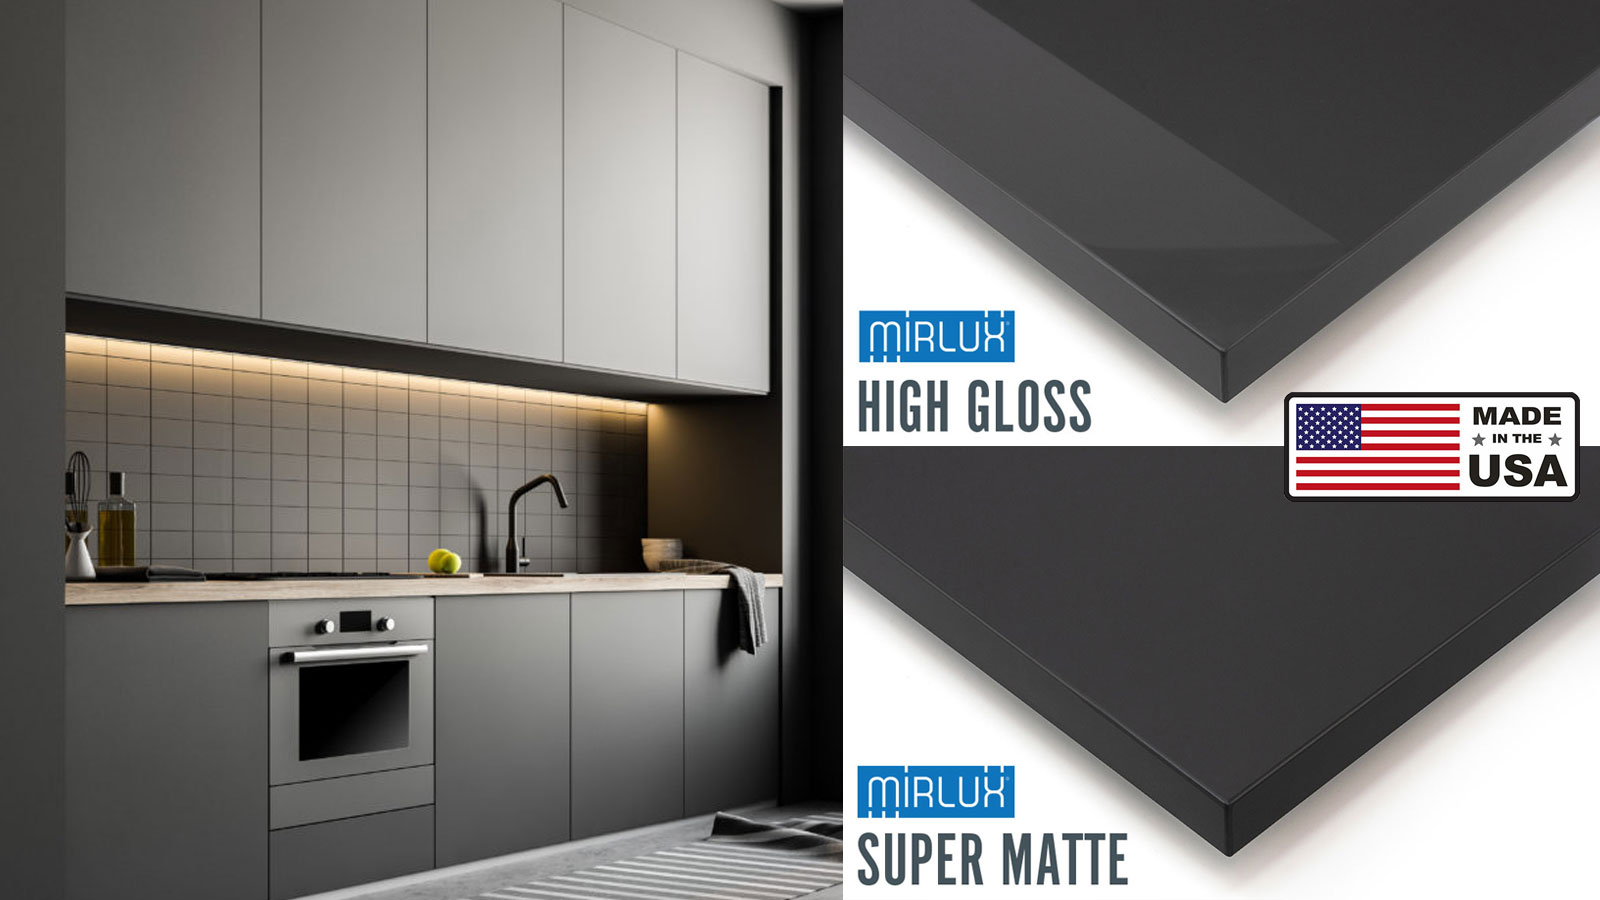 Mirlux High Gloss and Super Matte Surfaces